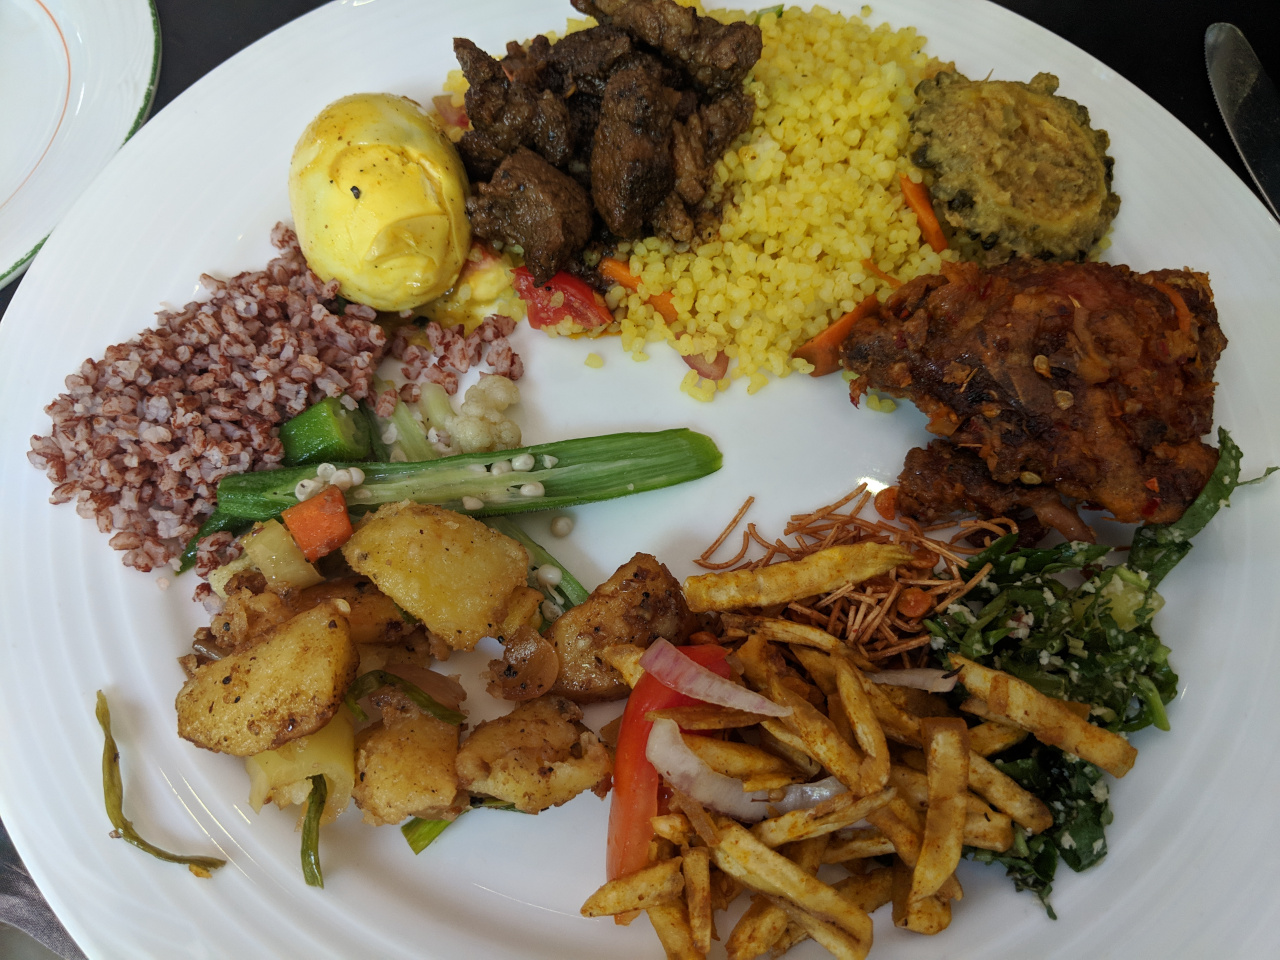 Sri Lankan Buffet - discover the best foods to try in Sri Lanka from this article. This is your Sri Lanka food tour 